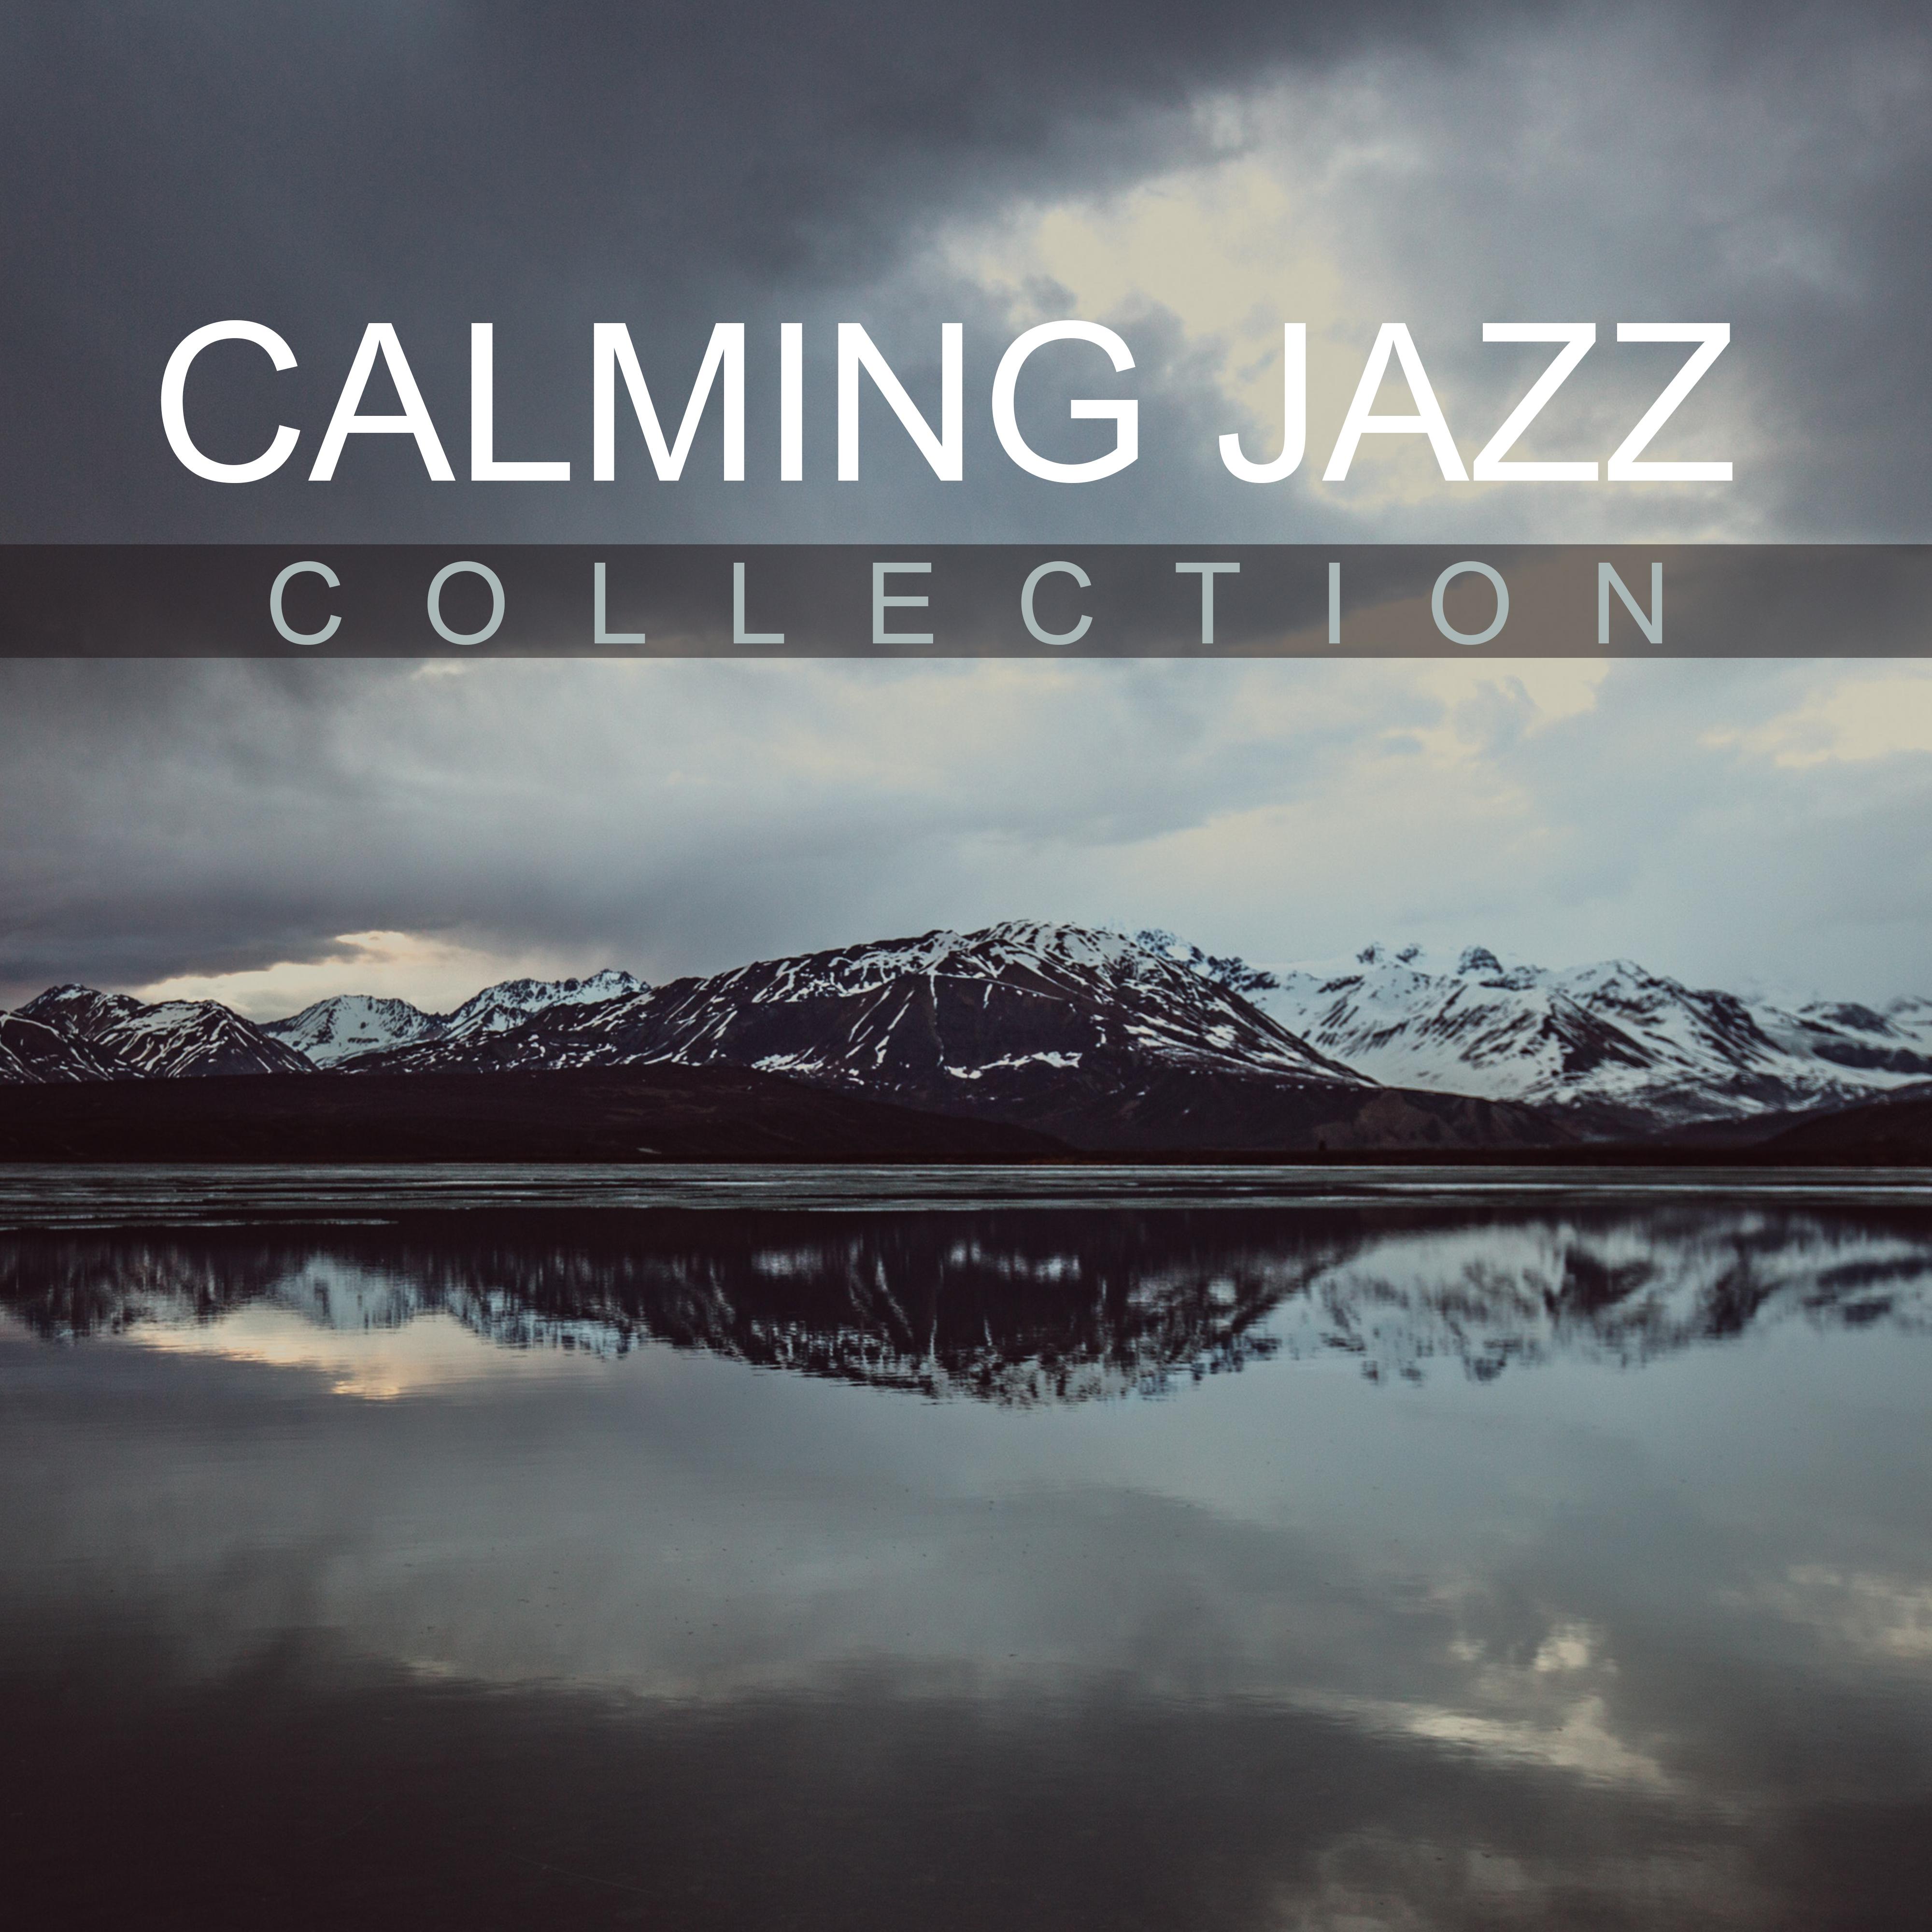 Calming Jazz Collection